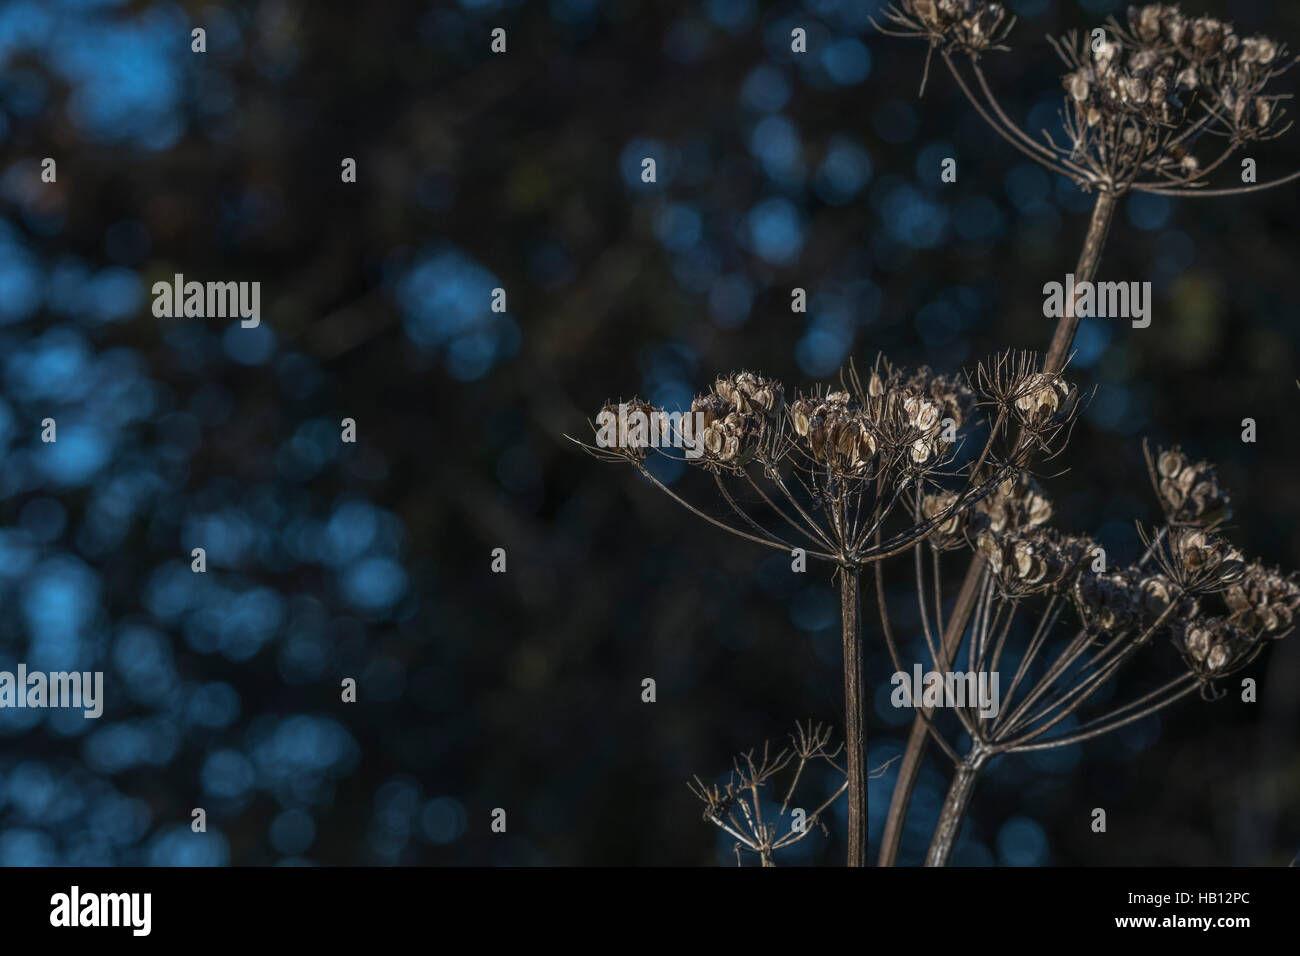 Seed heads of the umbellifer plant Hogweed  / Heracleum sphondylium in autumn time. Cow parsley family. Stock Photo